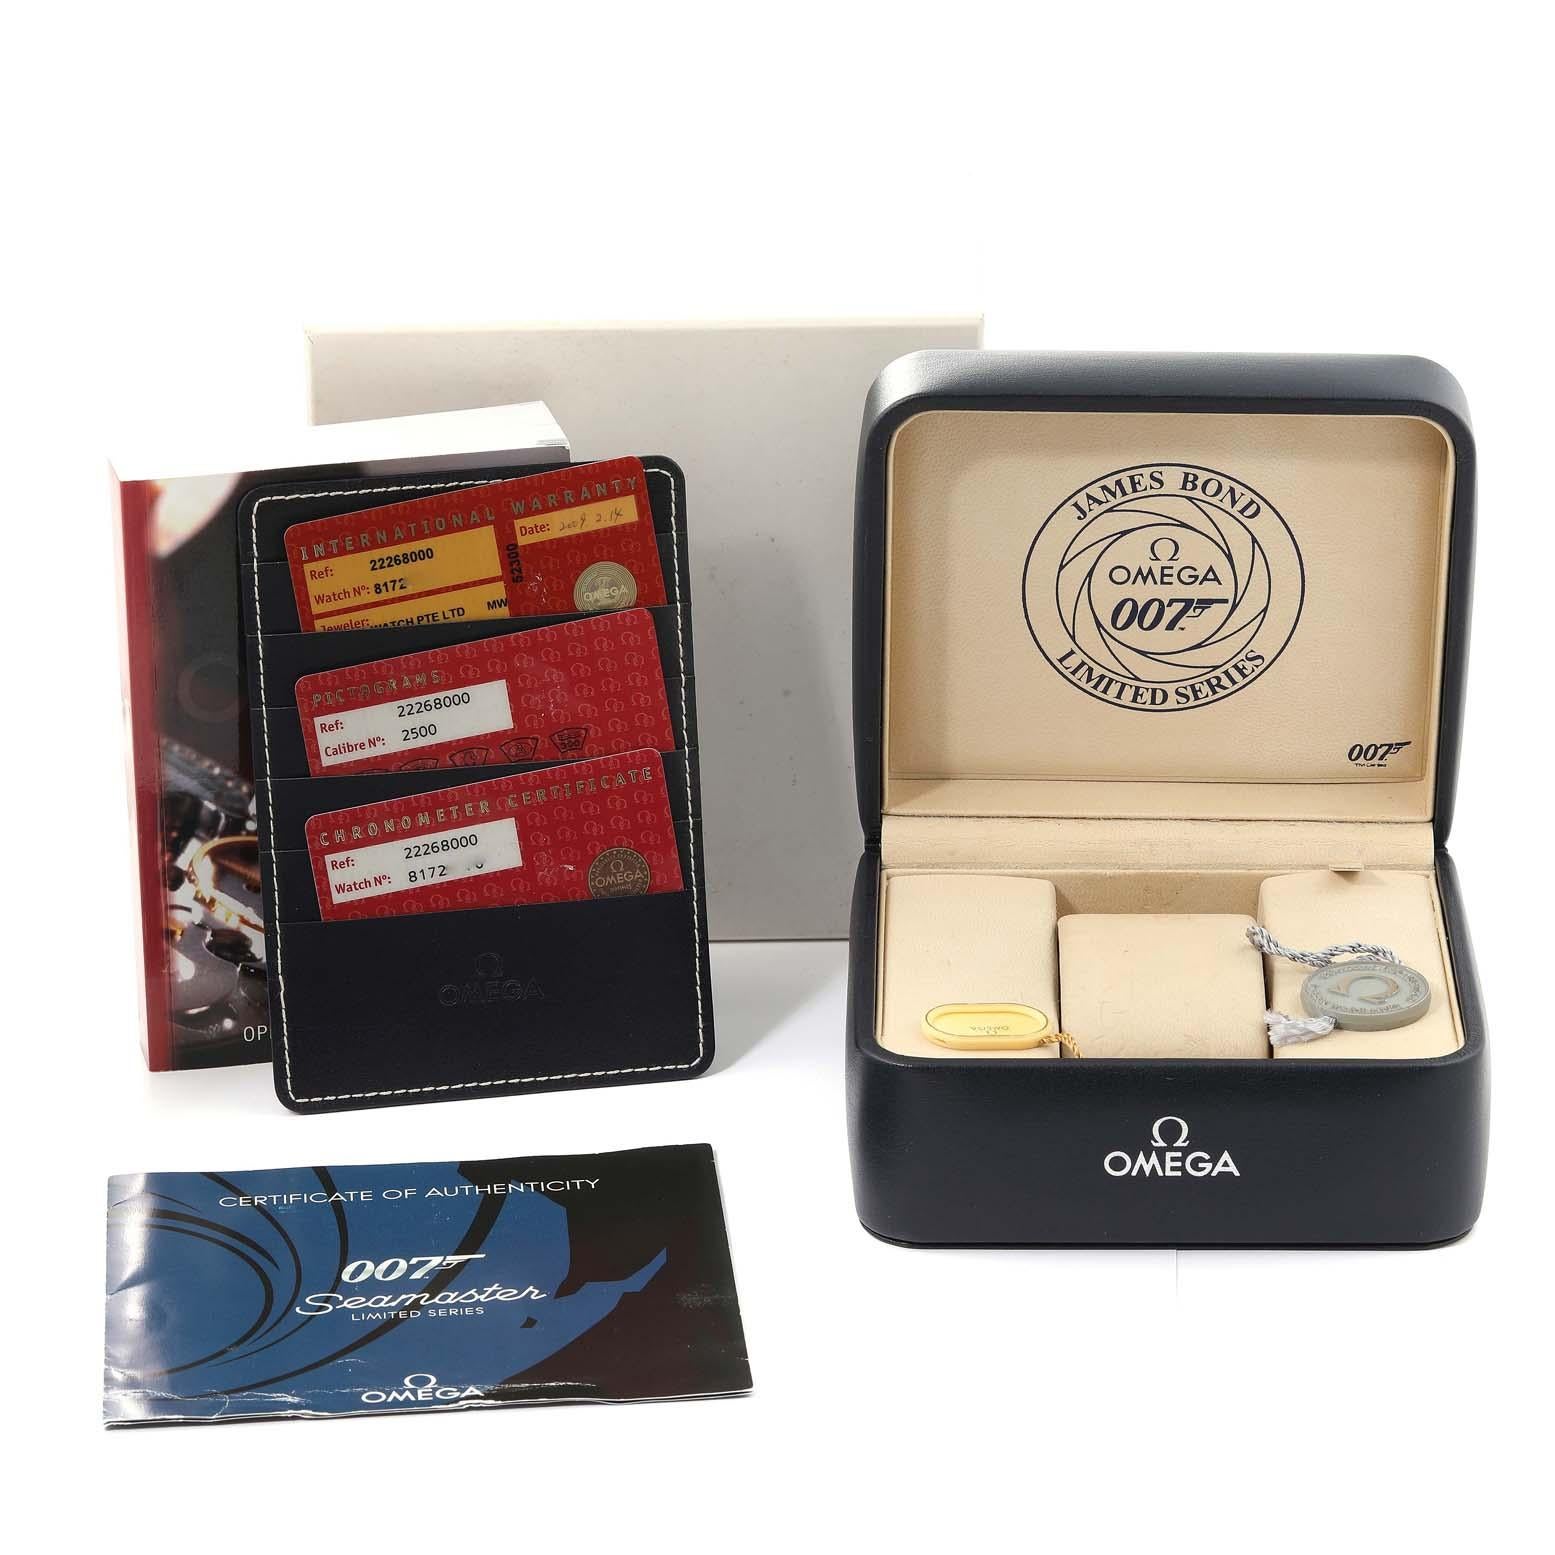 Omega Seamaster Bond 007 Limited Edition Steel Mens Watch 2226.80.00 Box Card For Sale 2